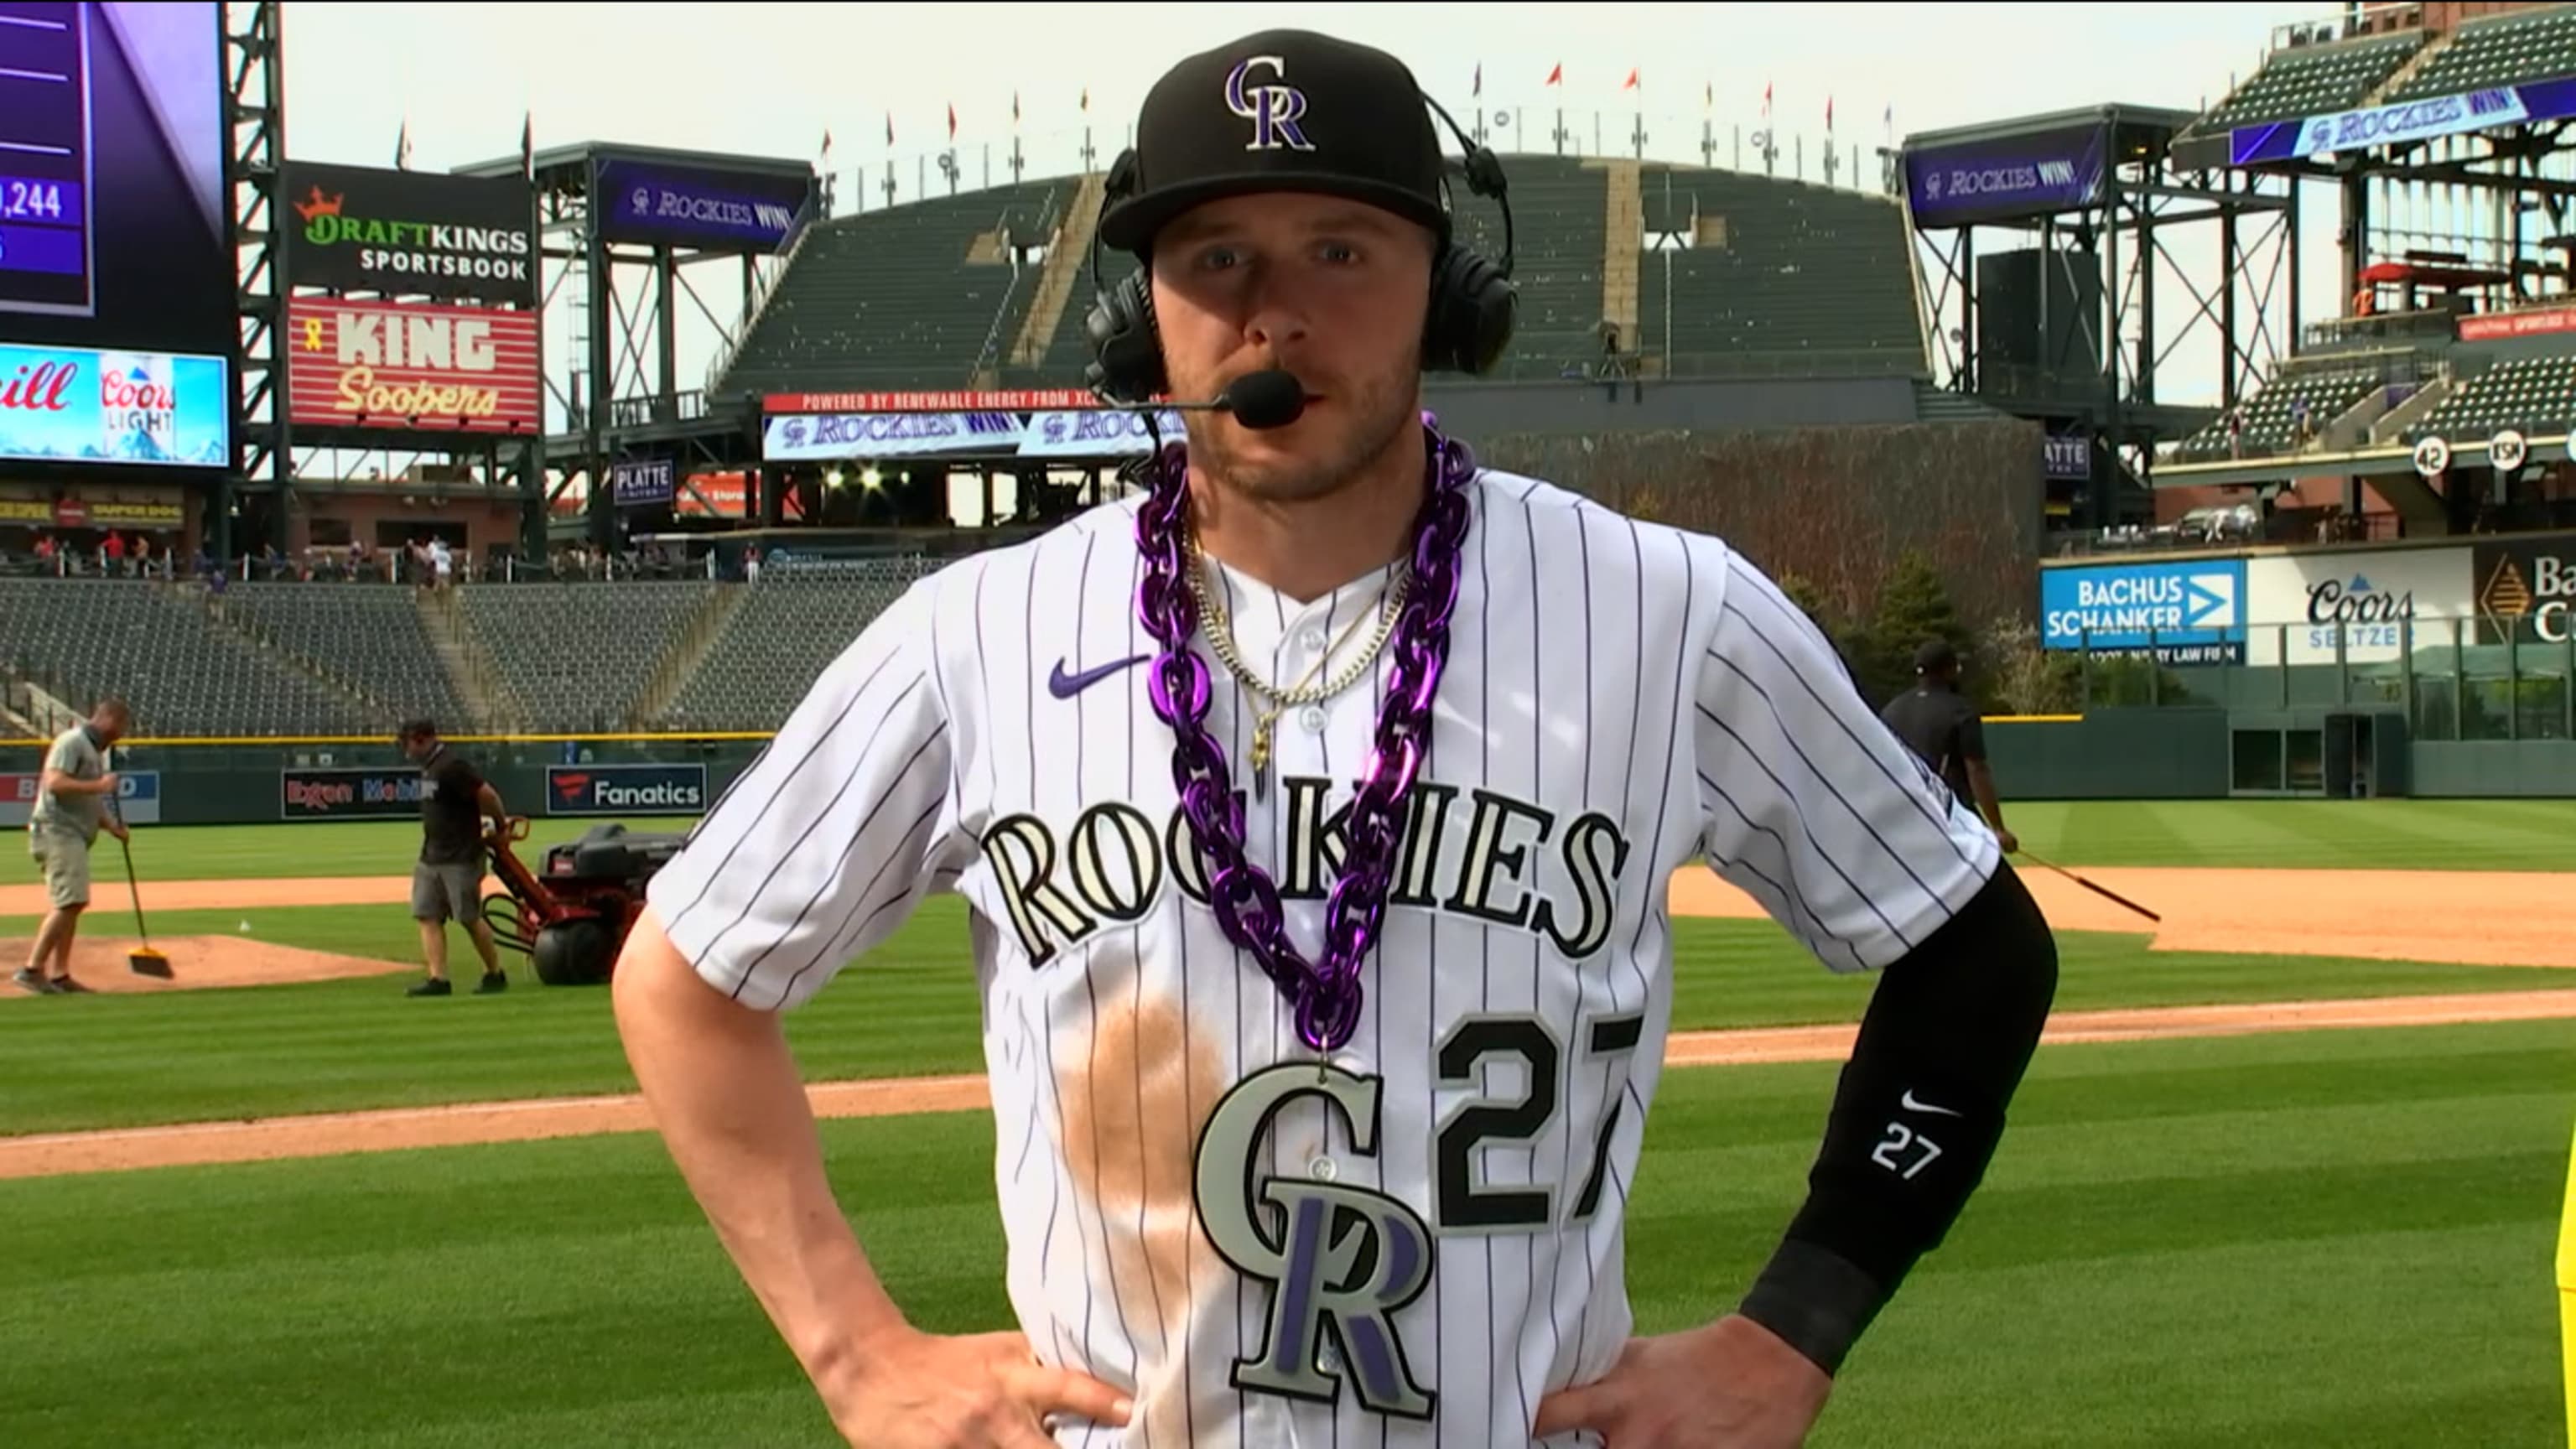 Trevor Story - MLB Shortstop - News, Stats, Bio and more - The Athletic